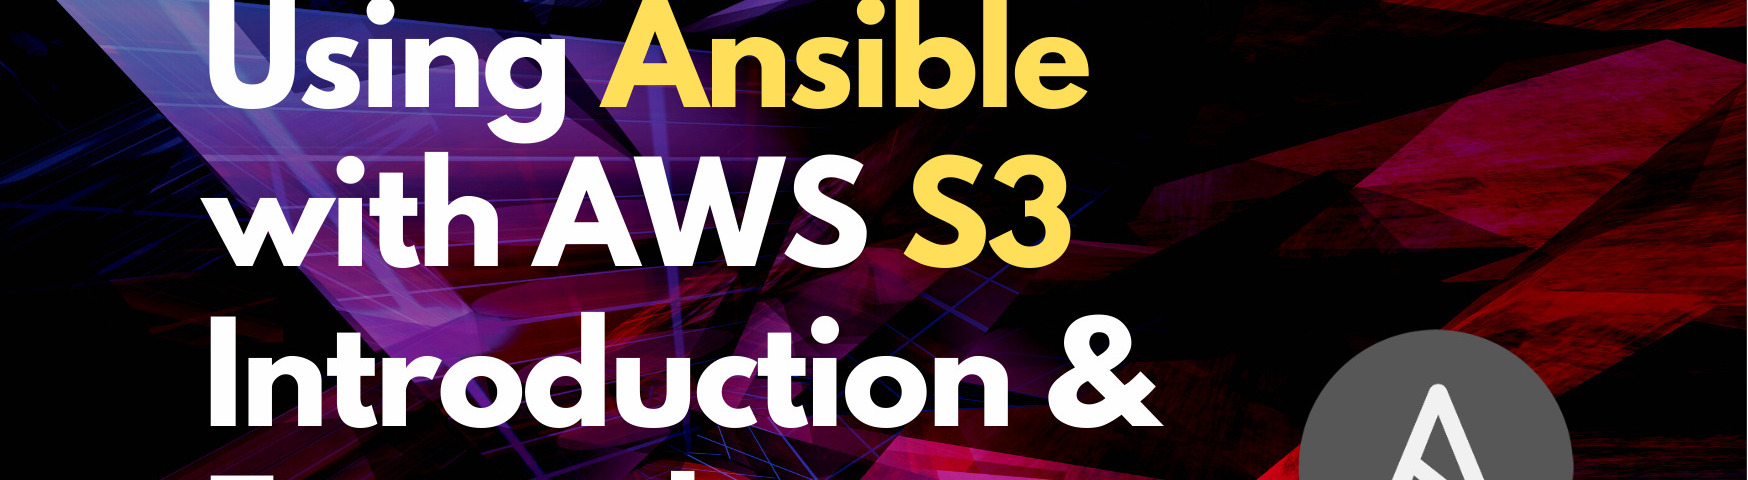 Ansible S3